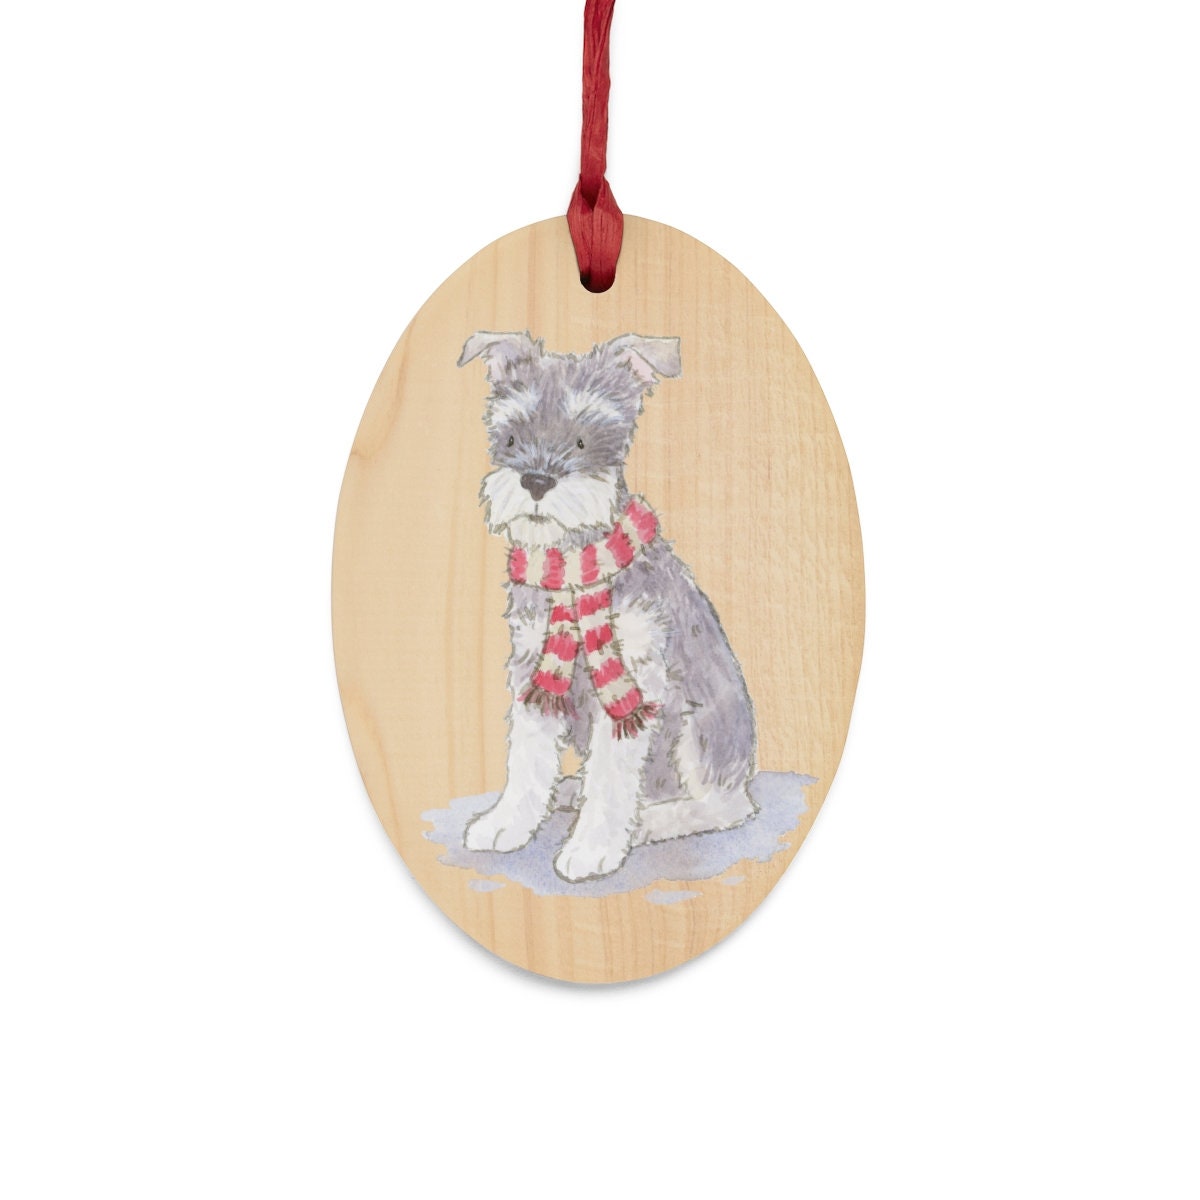 Schnauzer Ornament, Rustic Wood Ornament, Schnauzer Gift, Schnauzer Lover Gift, Schnauzer Christmas, Stocking Stuffer, Gift for Dog Lovers